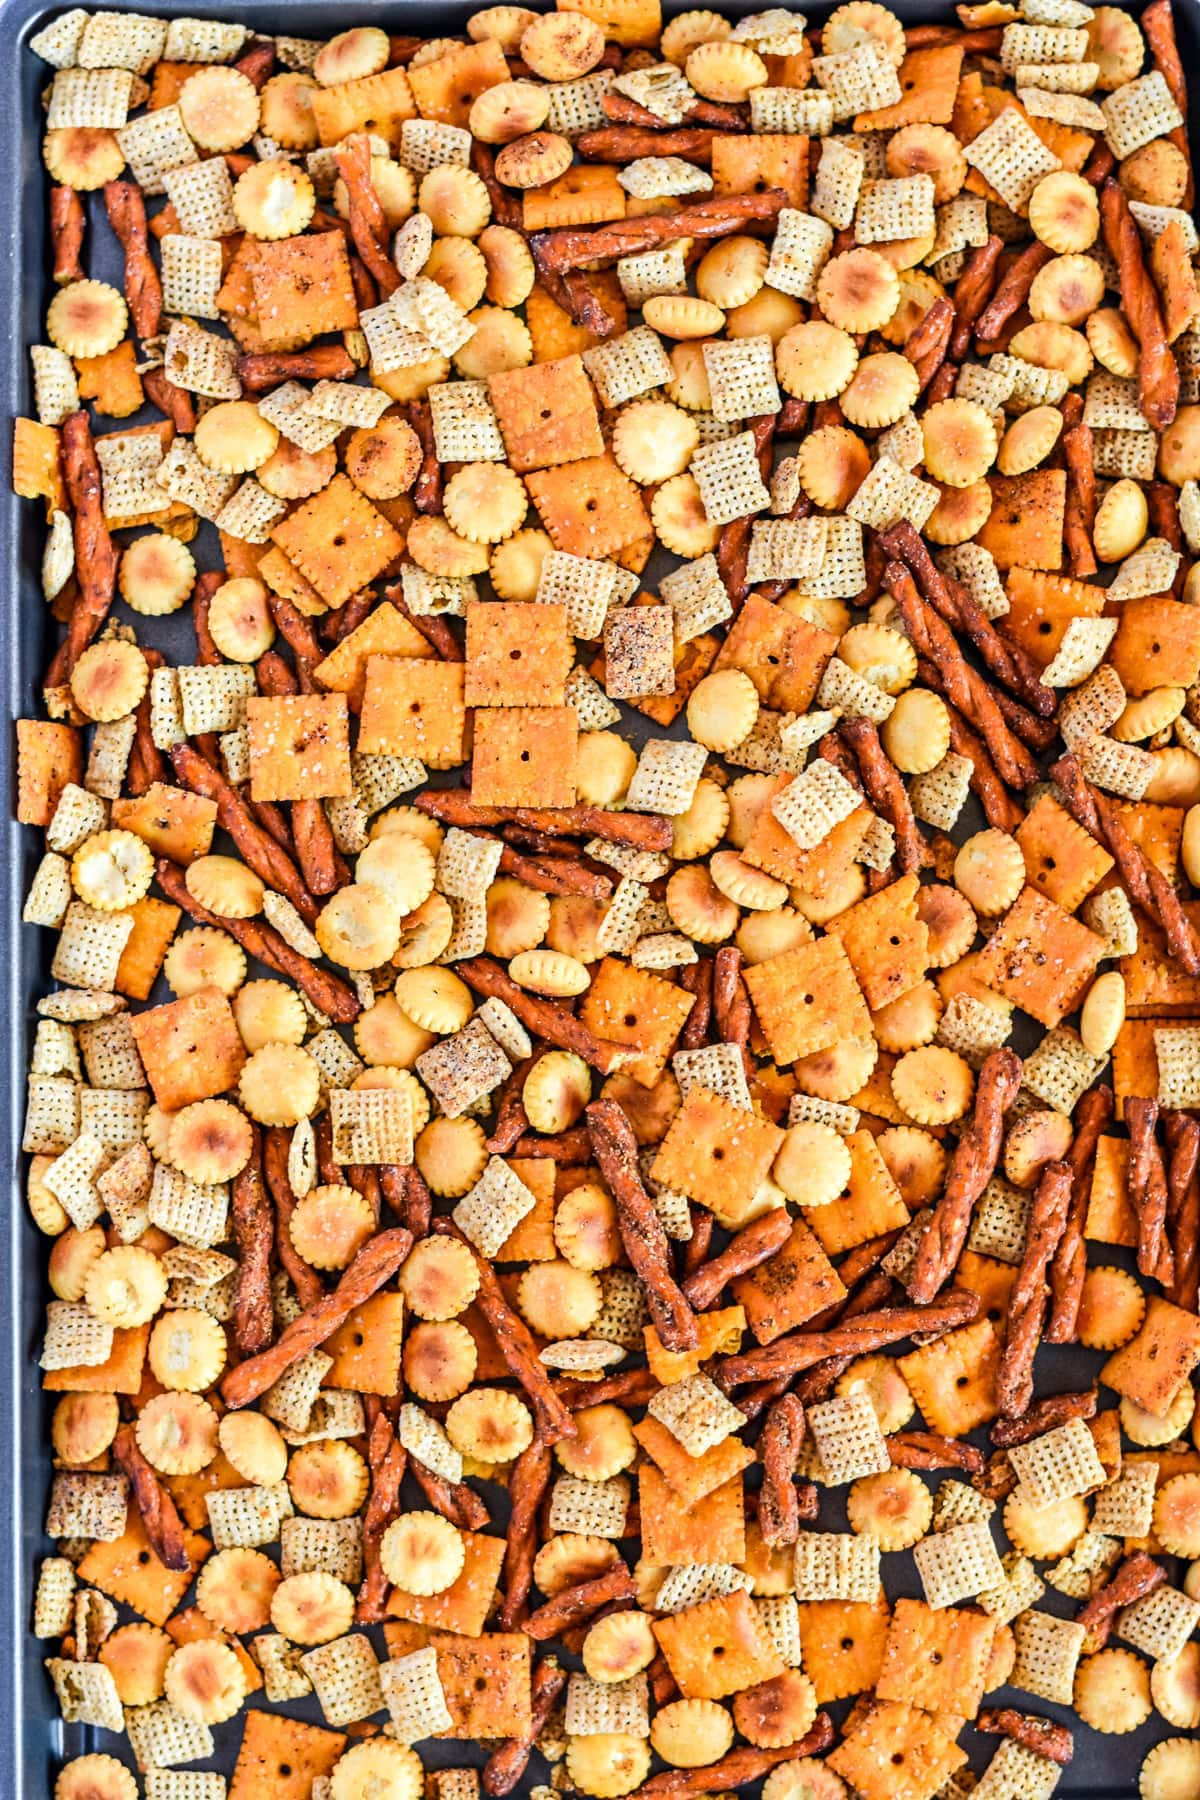 Sheet pan with chex mix on it